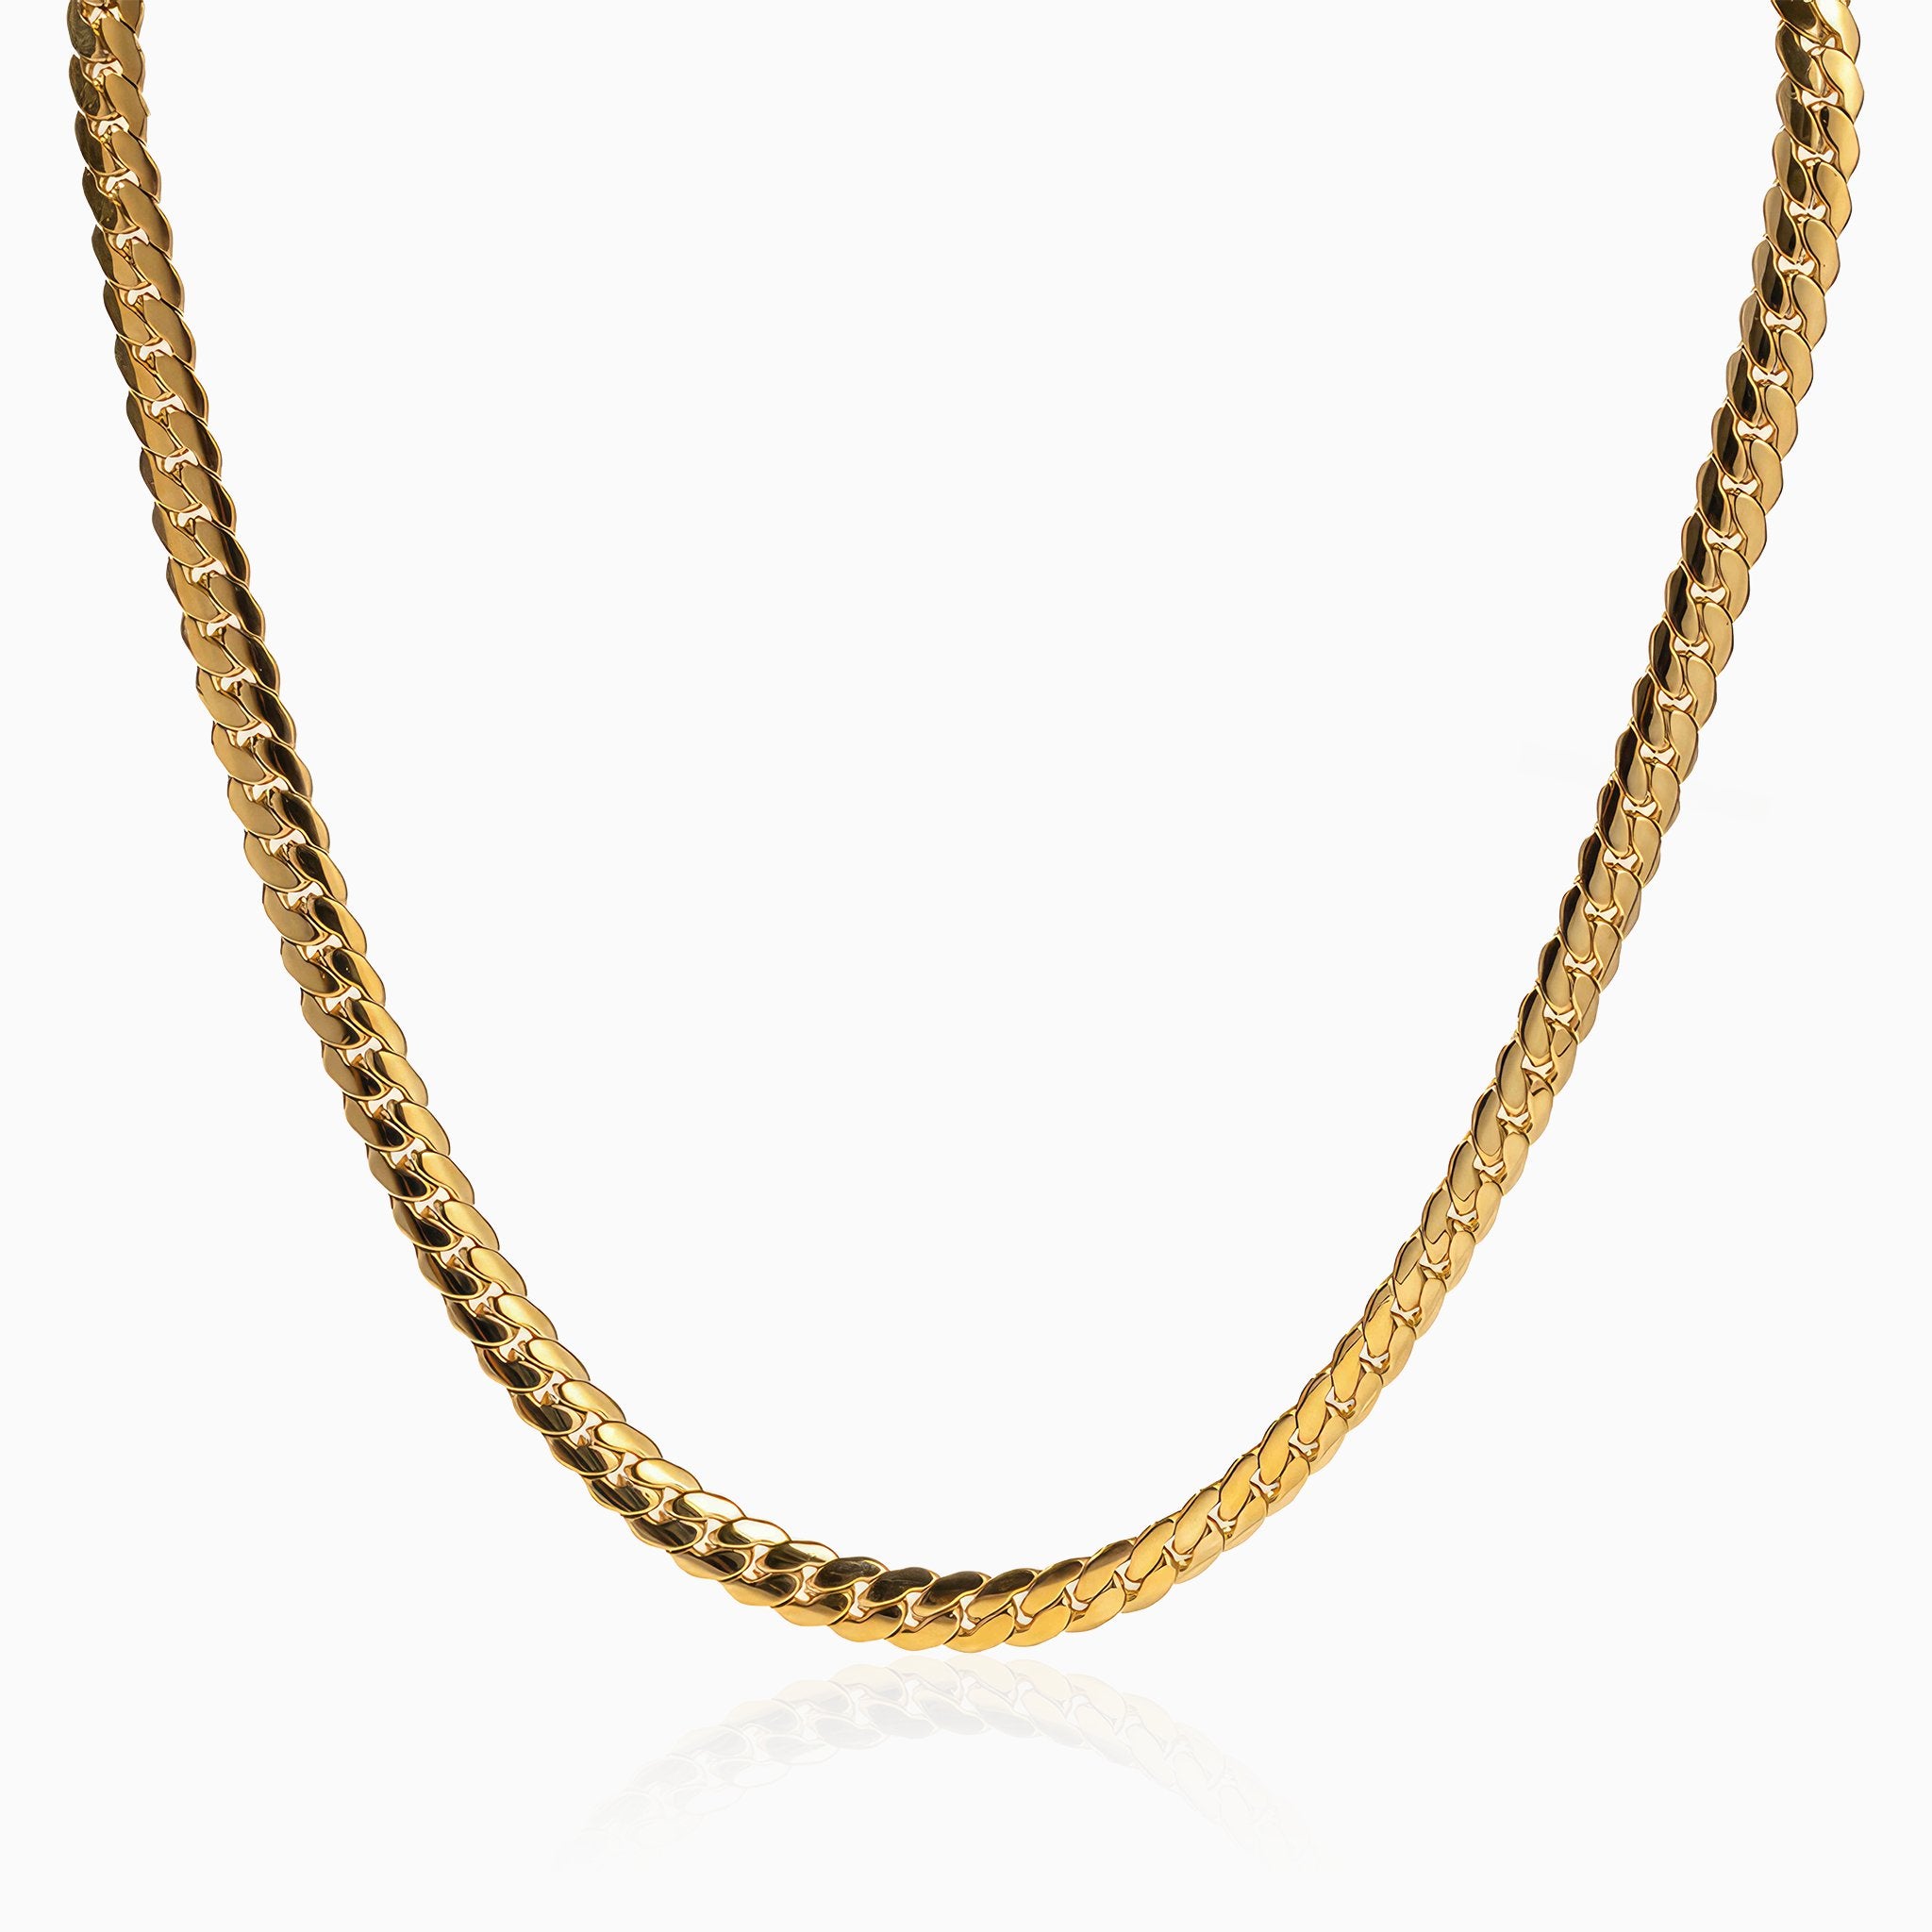 Minimalist Versatile Necklace - Nobbier - Necklace - 18K Gold And Titanium PVD Coated Jewelry